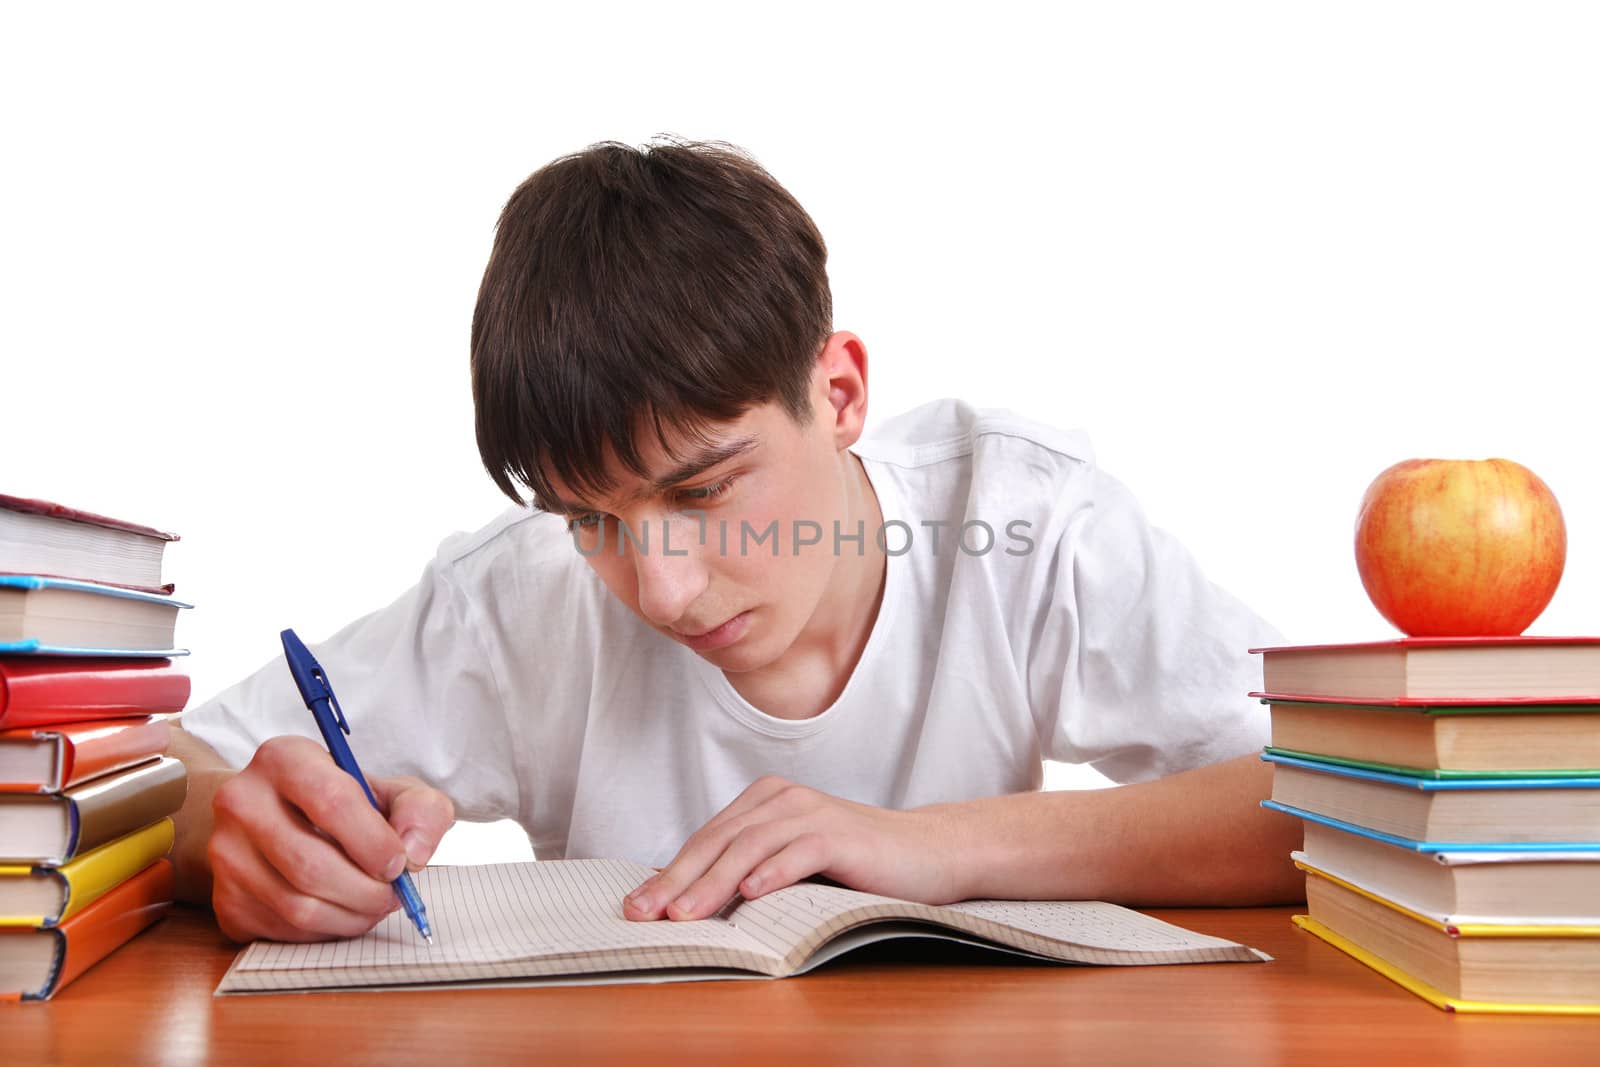 Student writing at the School Desk Isolated on the White Background